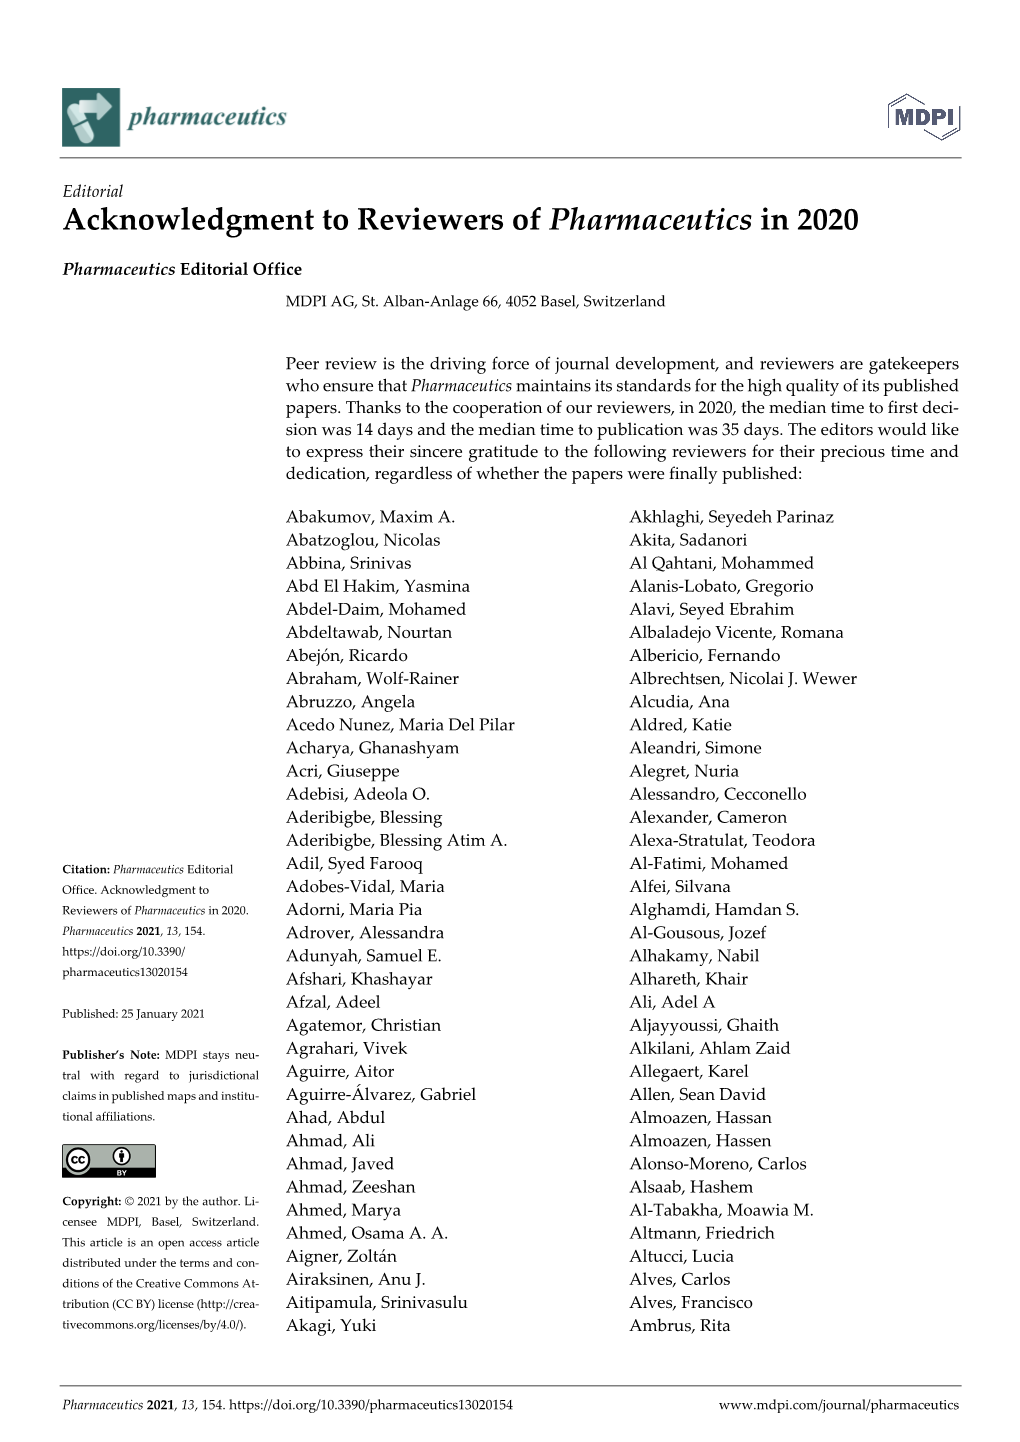 Acknowledgment to Reviewers of Pharmaceutics in 2020